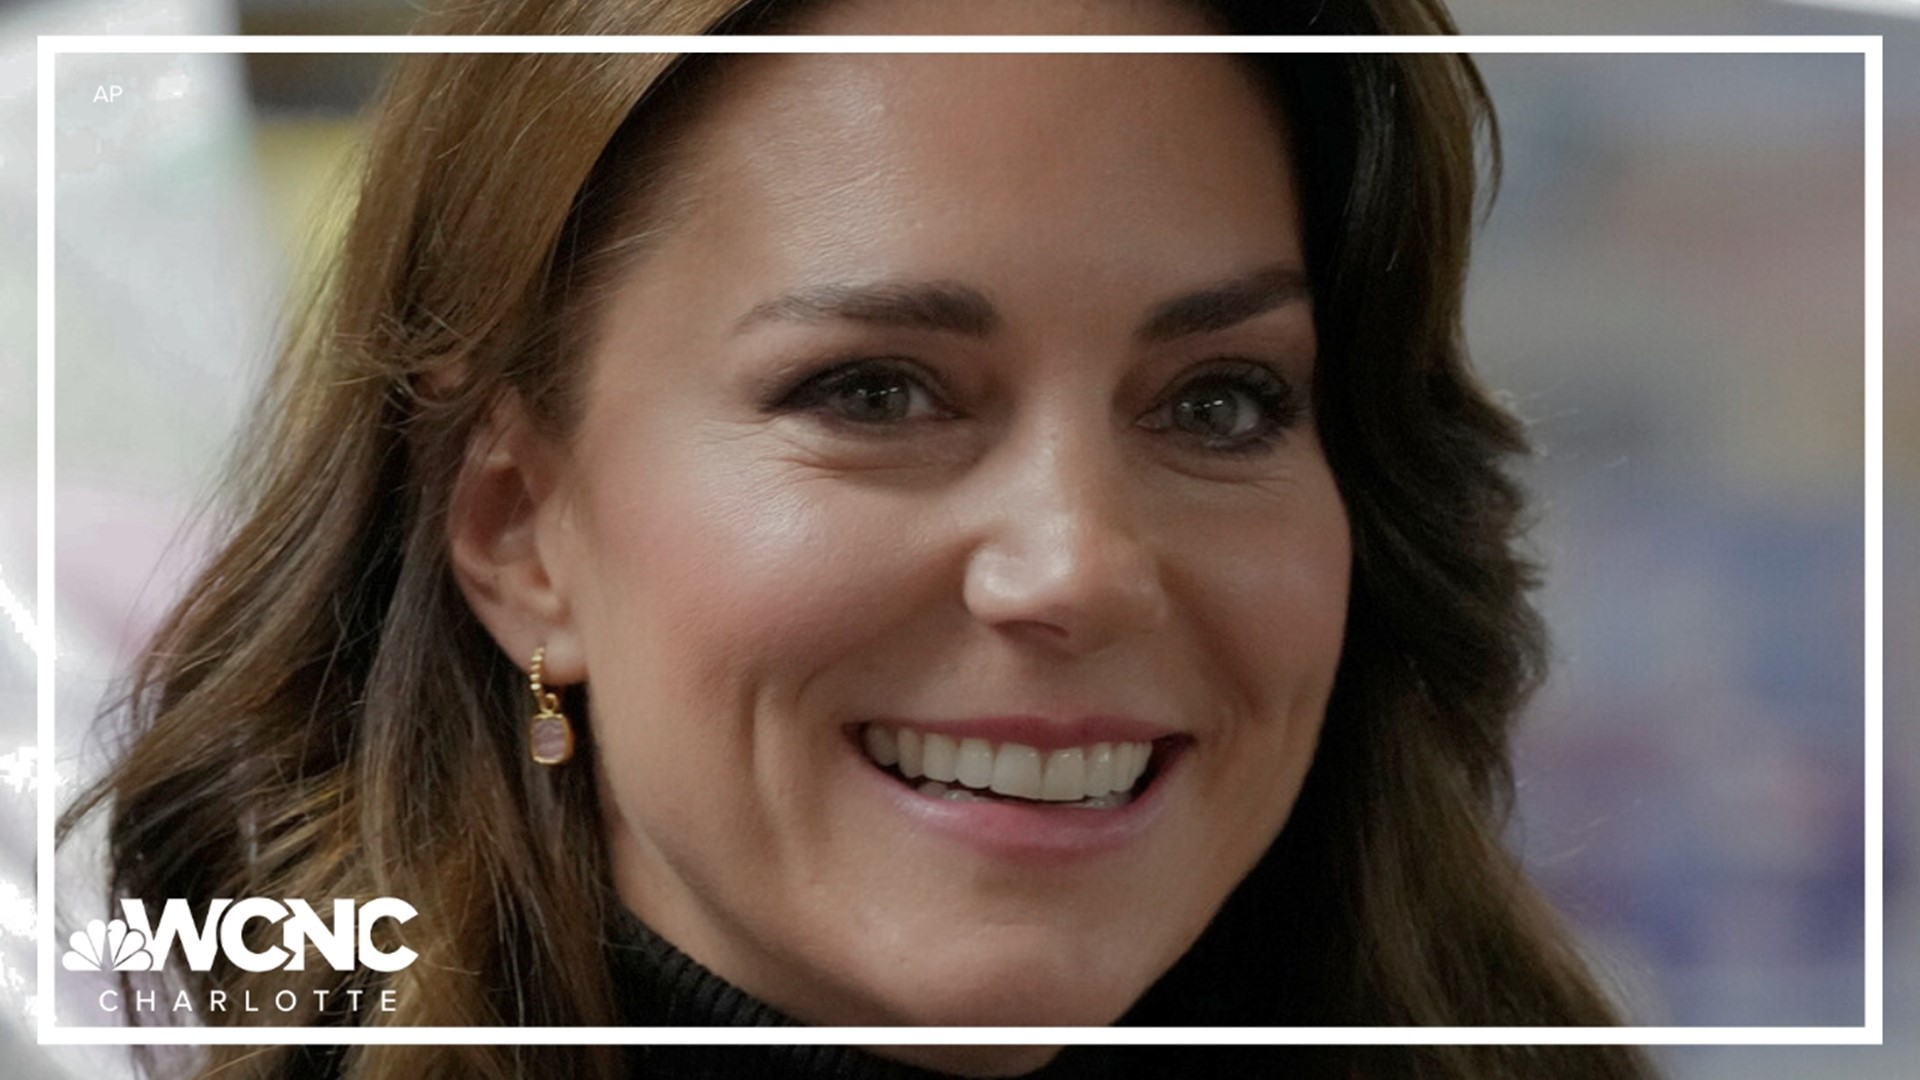 News of Kate's diagnosis comes just months after King Charles III announced he had cancer.